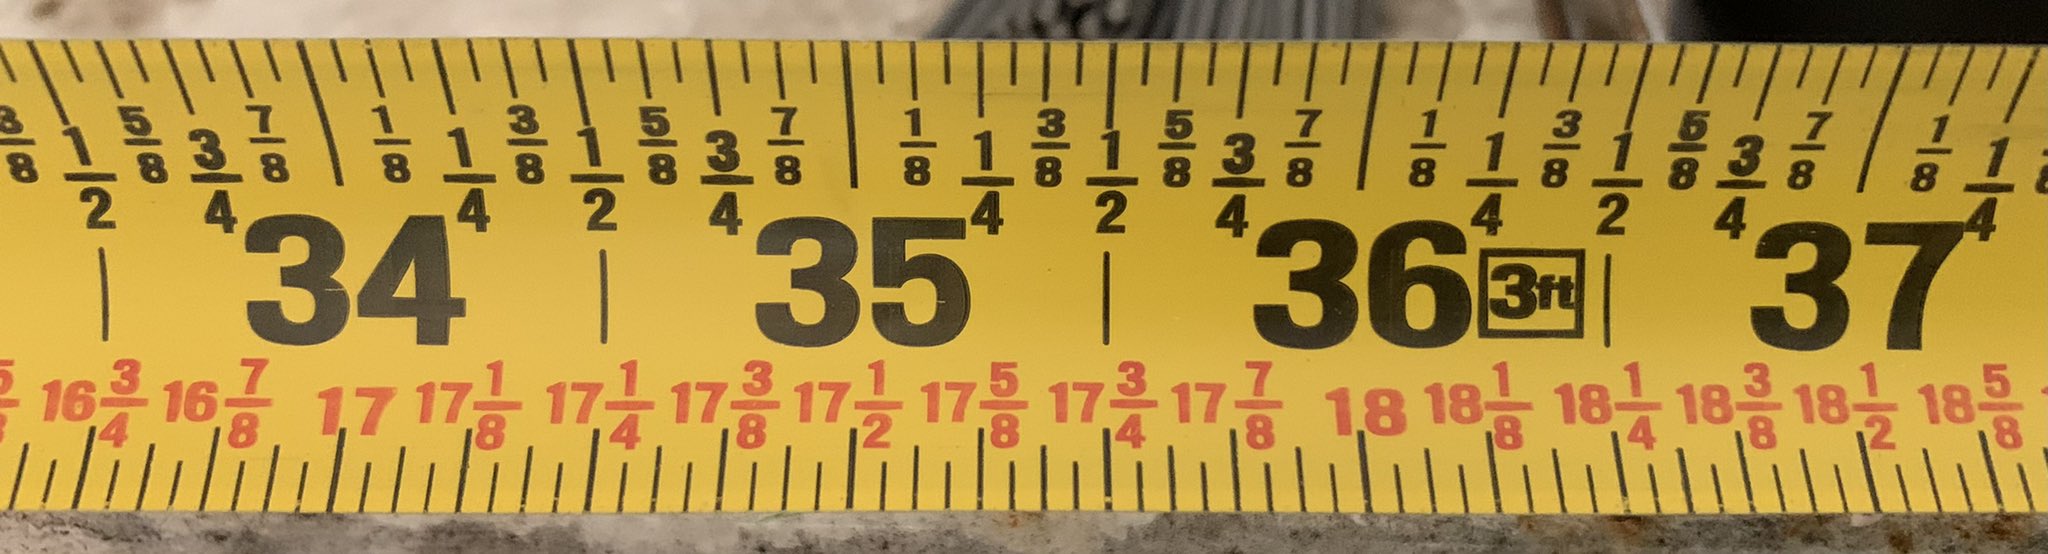 Tim Brzezinski on X: My wife and I recently bought a new tape measure. As  a kid, I don't remember seeing tape measures have all this extra detail.  Were these fraction labels